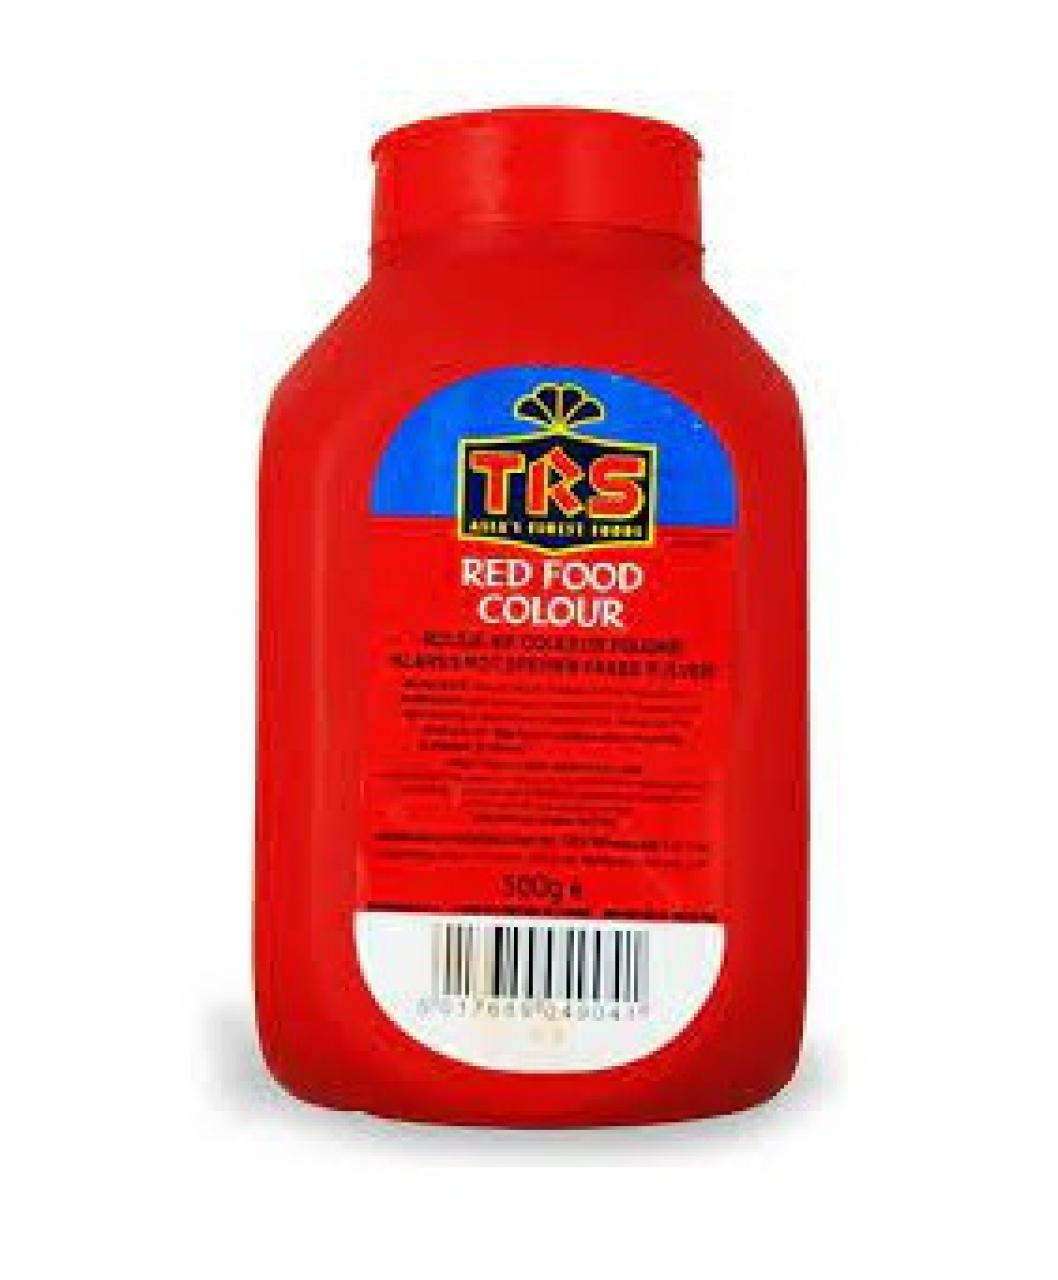 FOOD COLOUR RED TRS